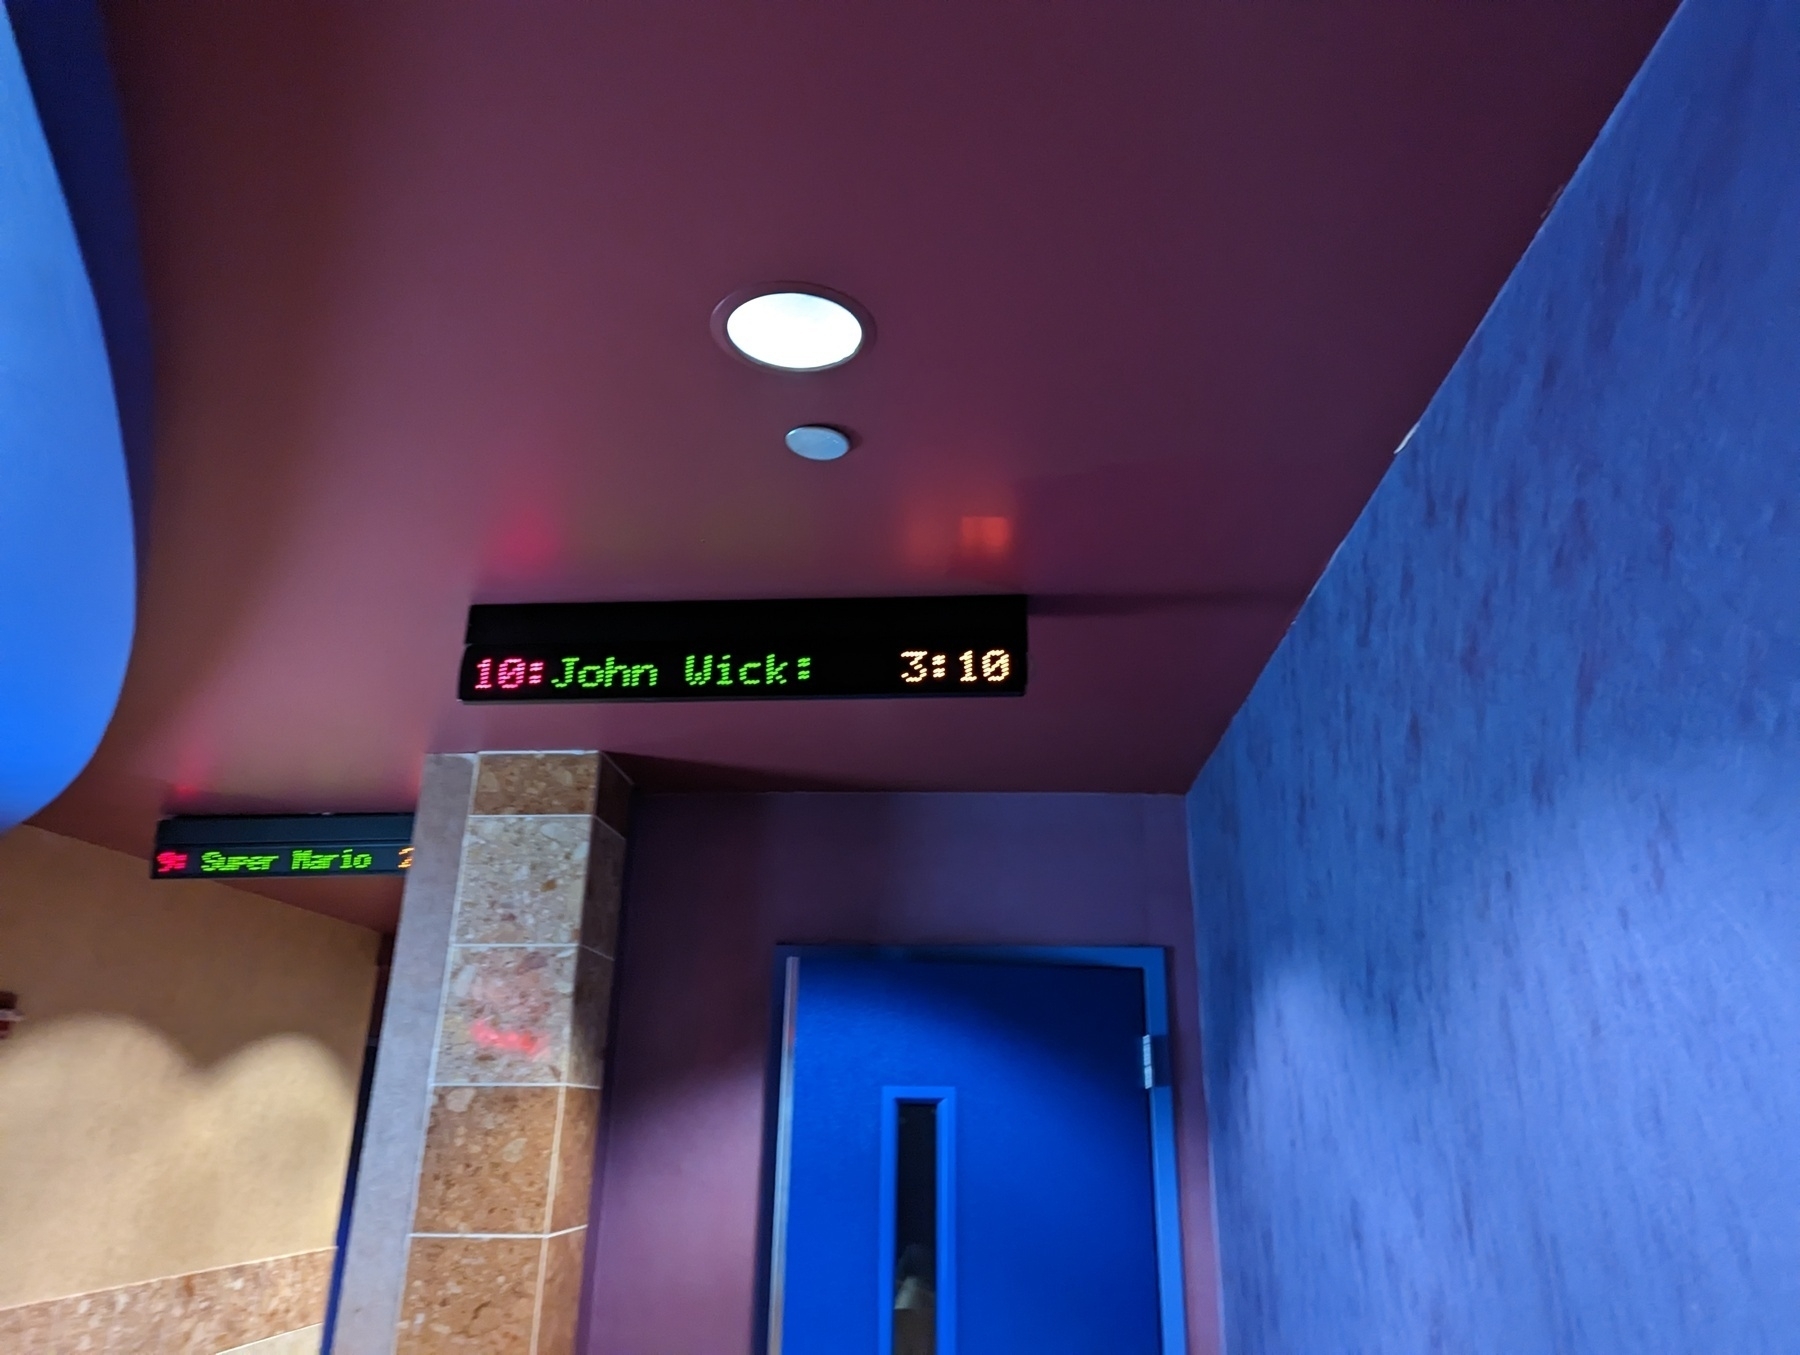 A red lot sign outside a multiplex theater door Sunday, April 9th 2023 in Richmond, California advertises "John wick: Chapter 4" 